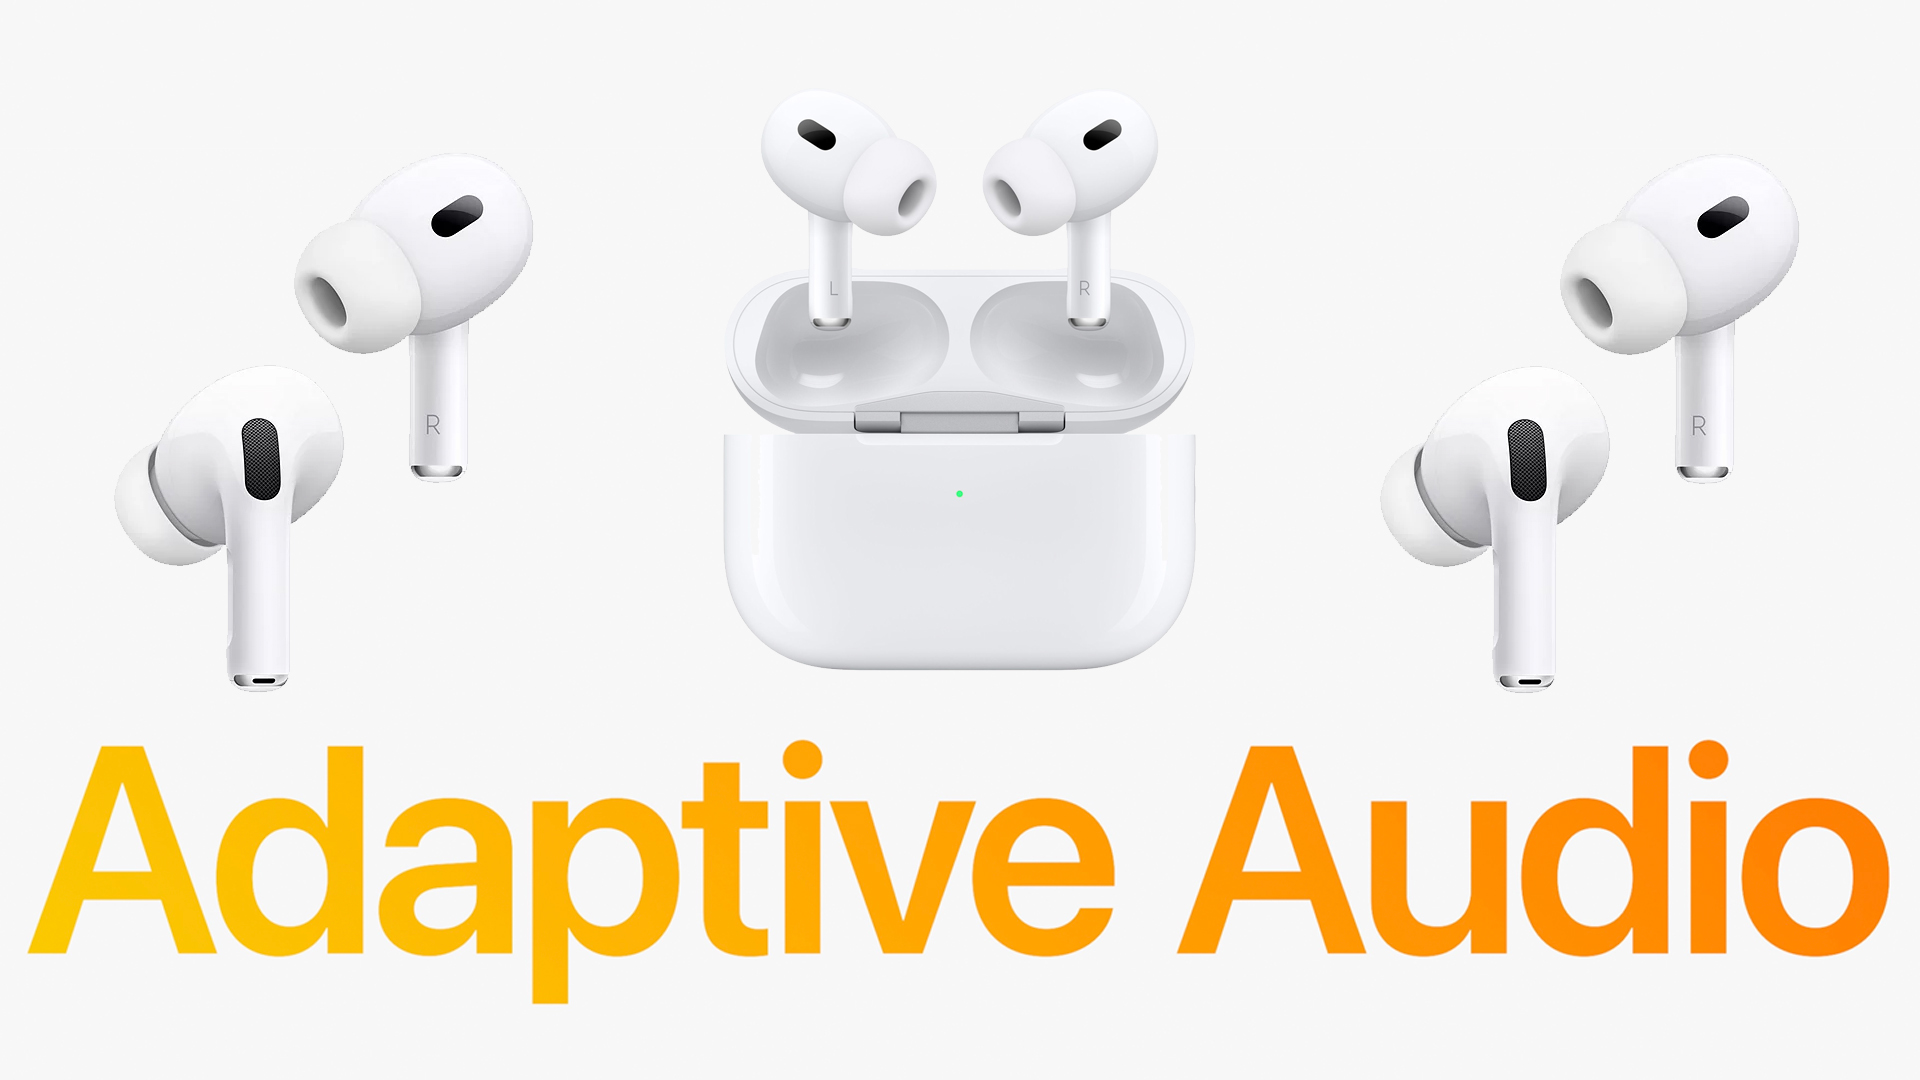 AirPods with Adaptive Audio